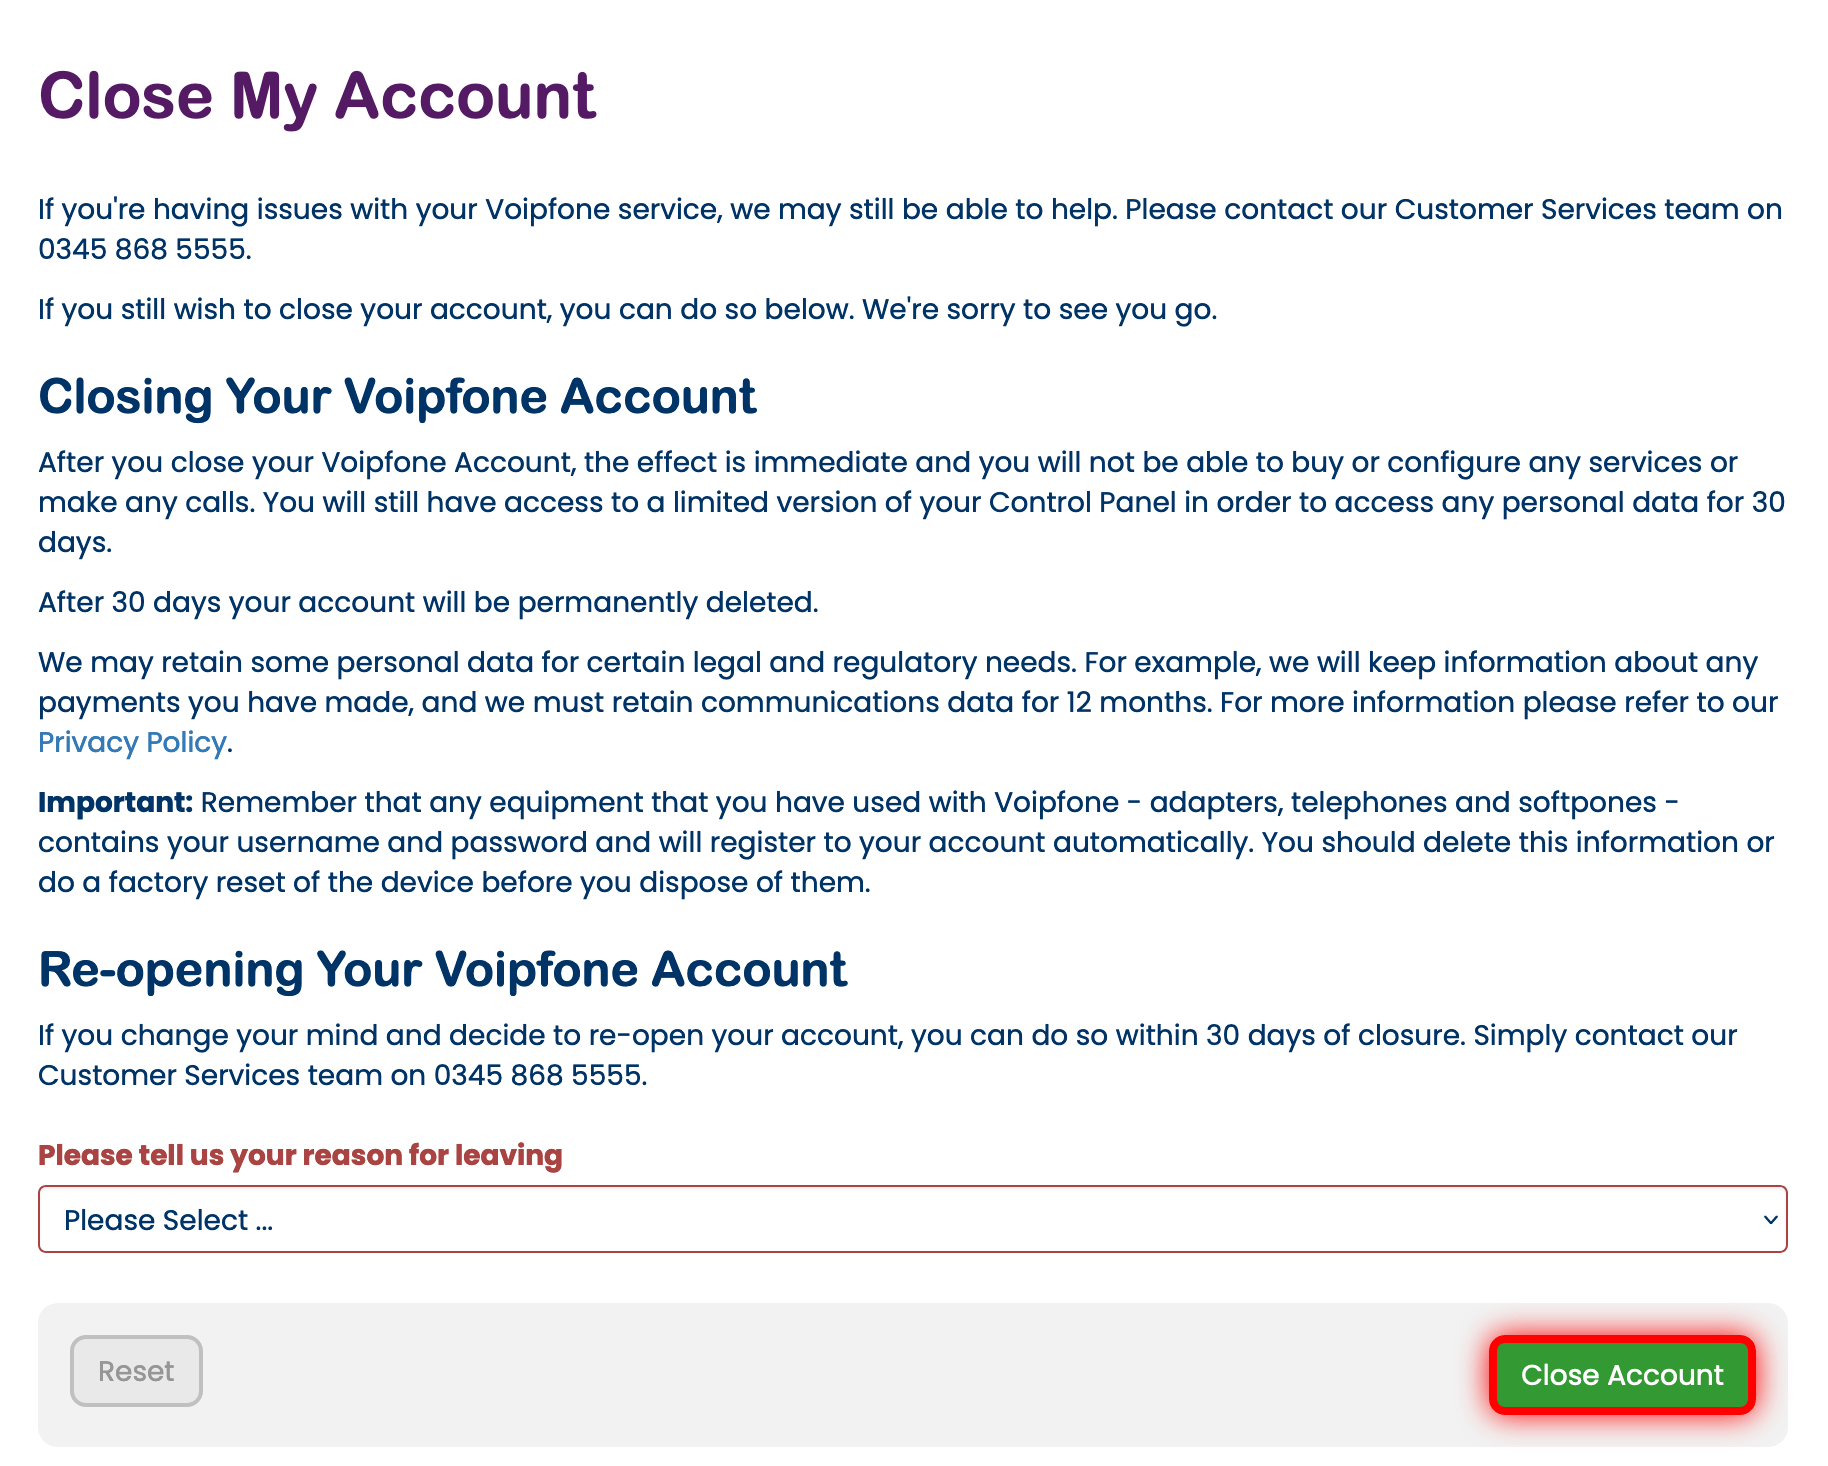 Closing your account